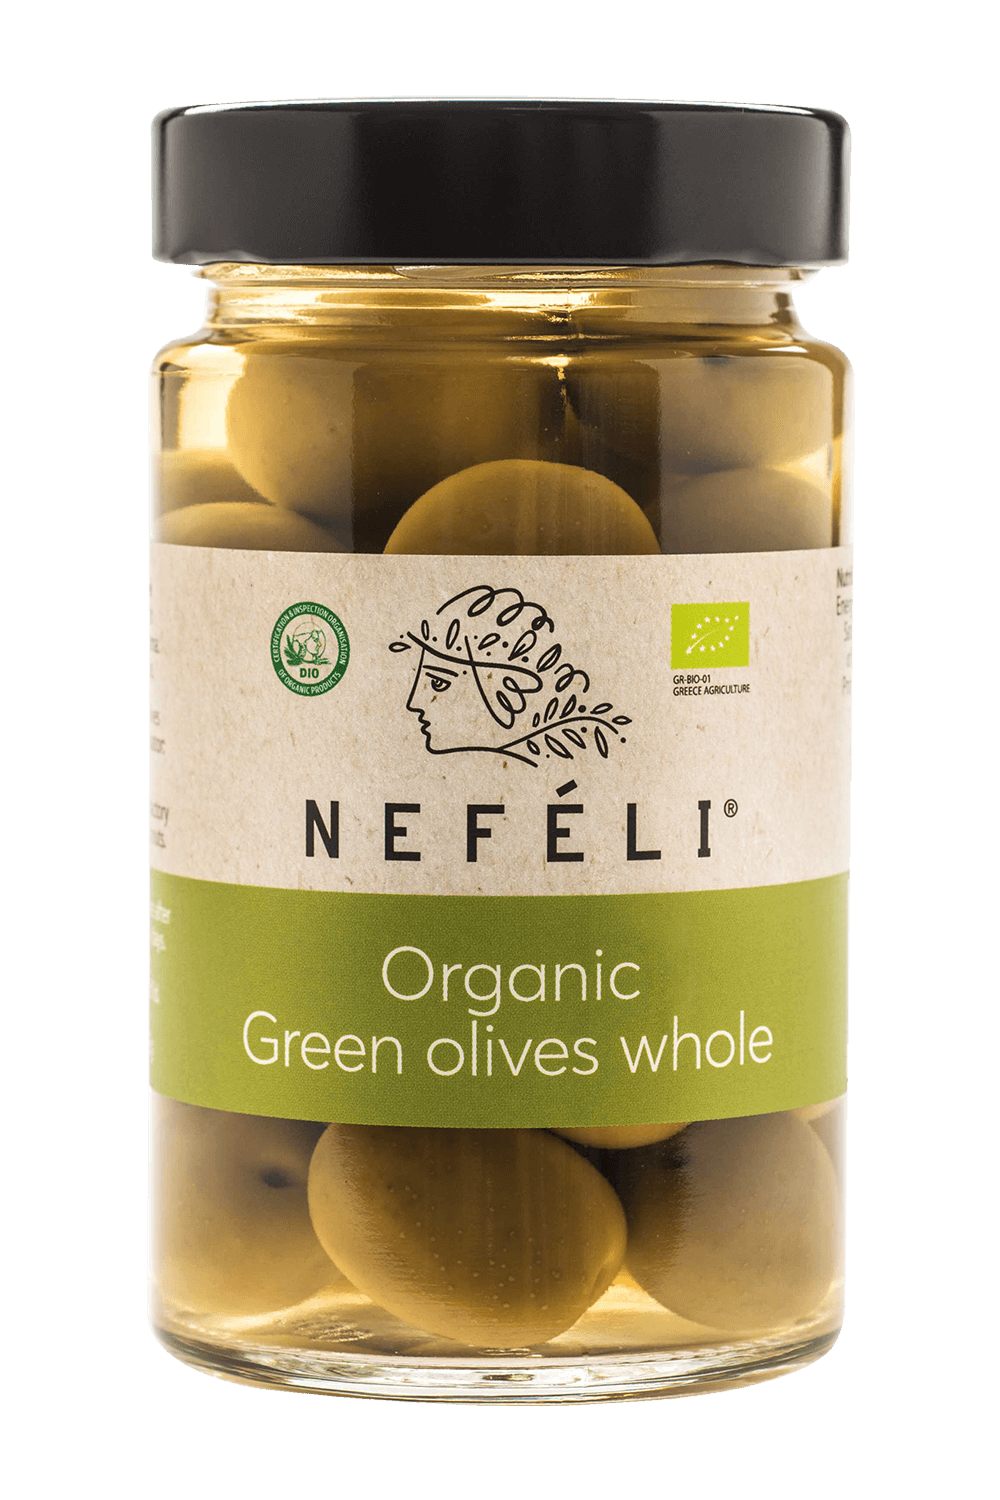 Organic Green olives whole